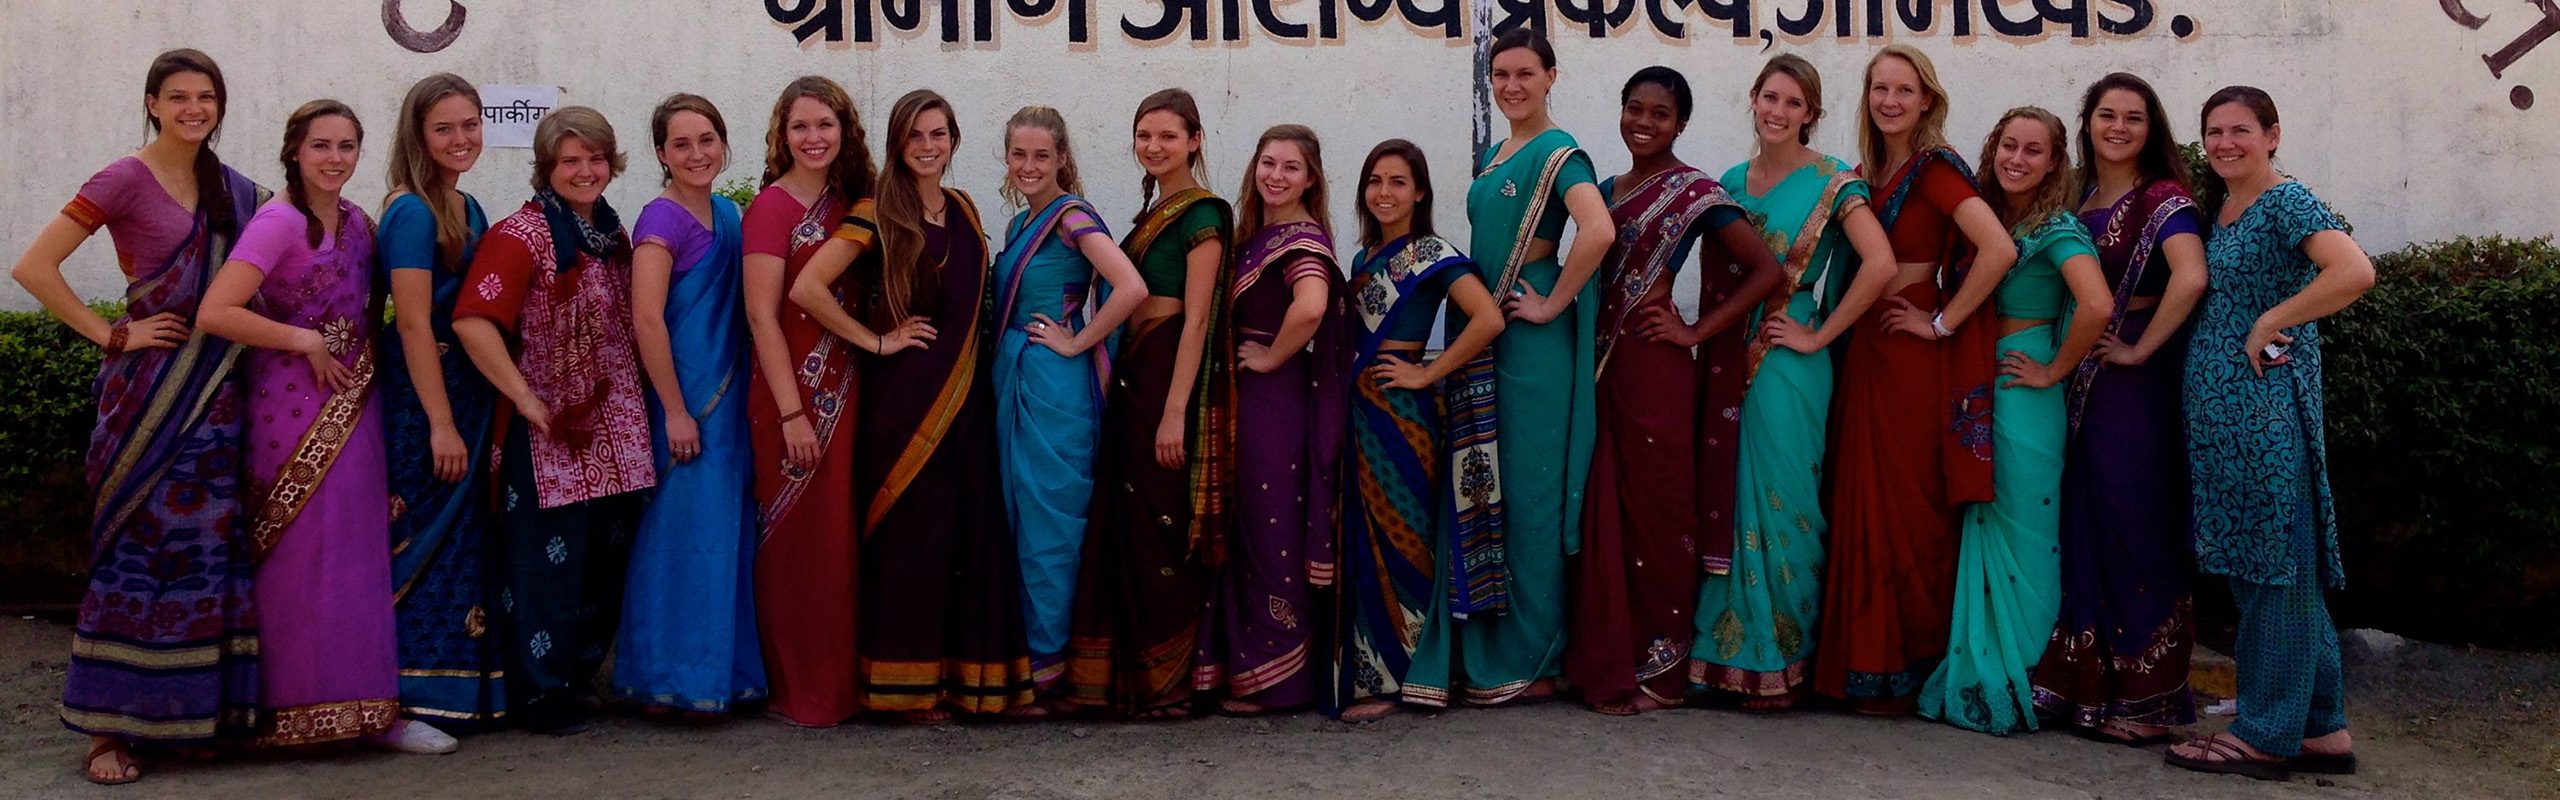 Students majoring in public health studies in Jamked, India, where they worked to complete their practicum at the Comprehensive Rural Health Project.